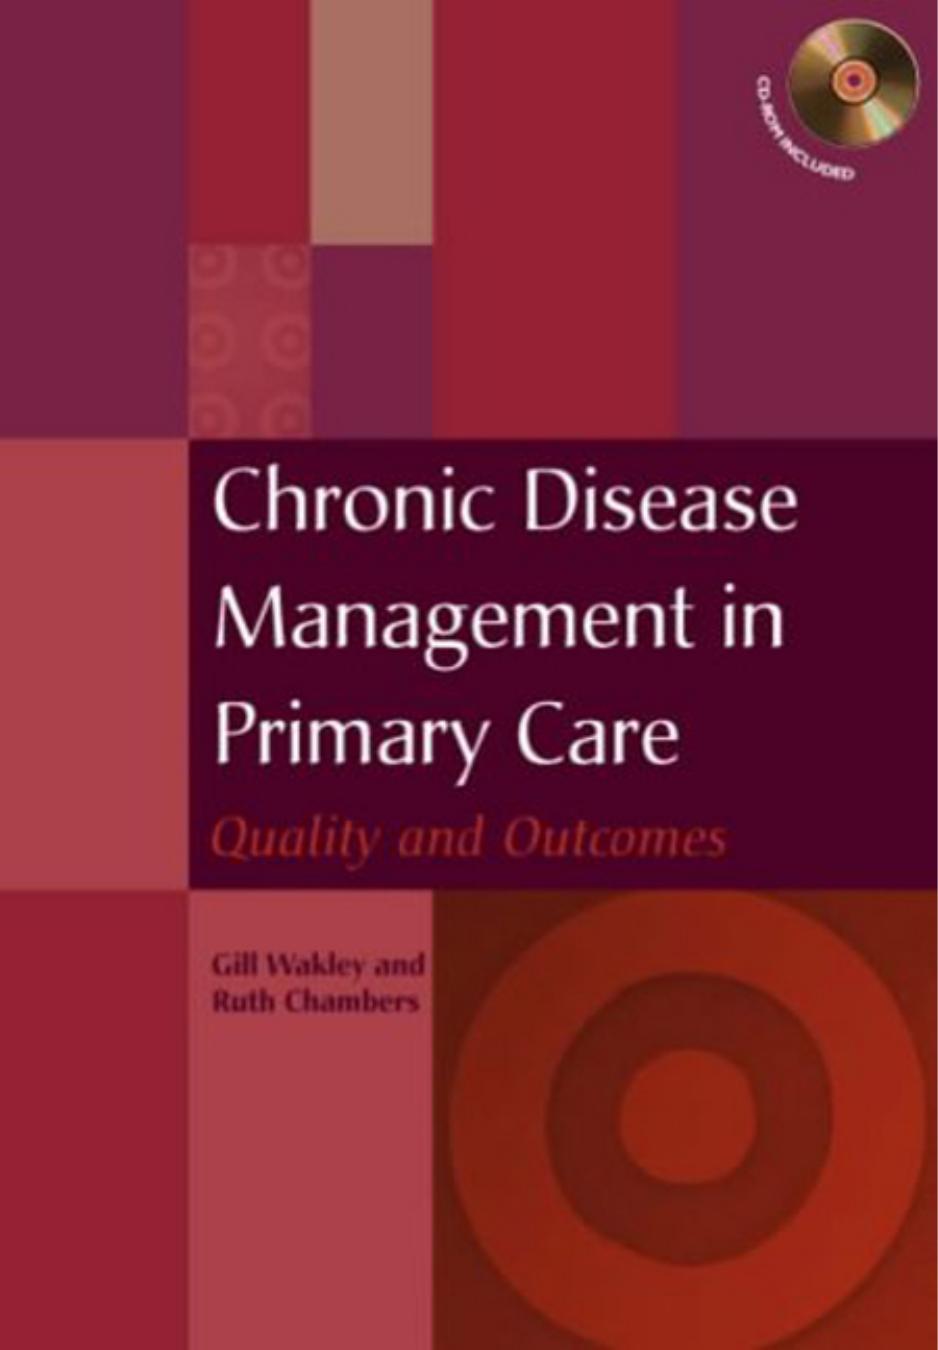 Chronic Disease Management in Primary Care 2005